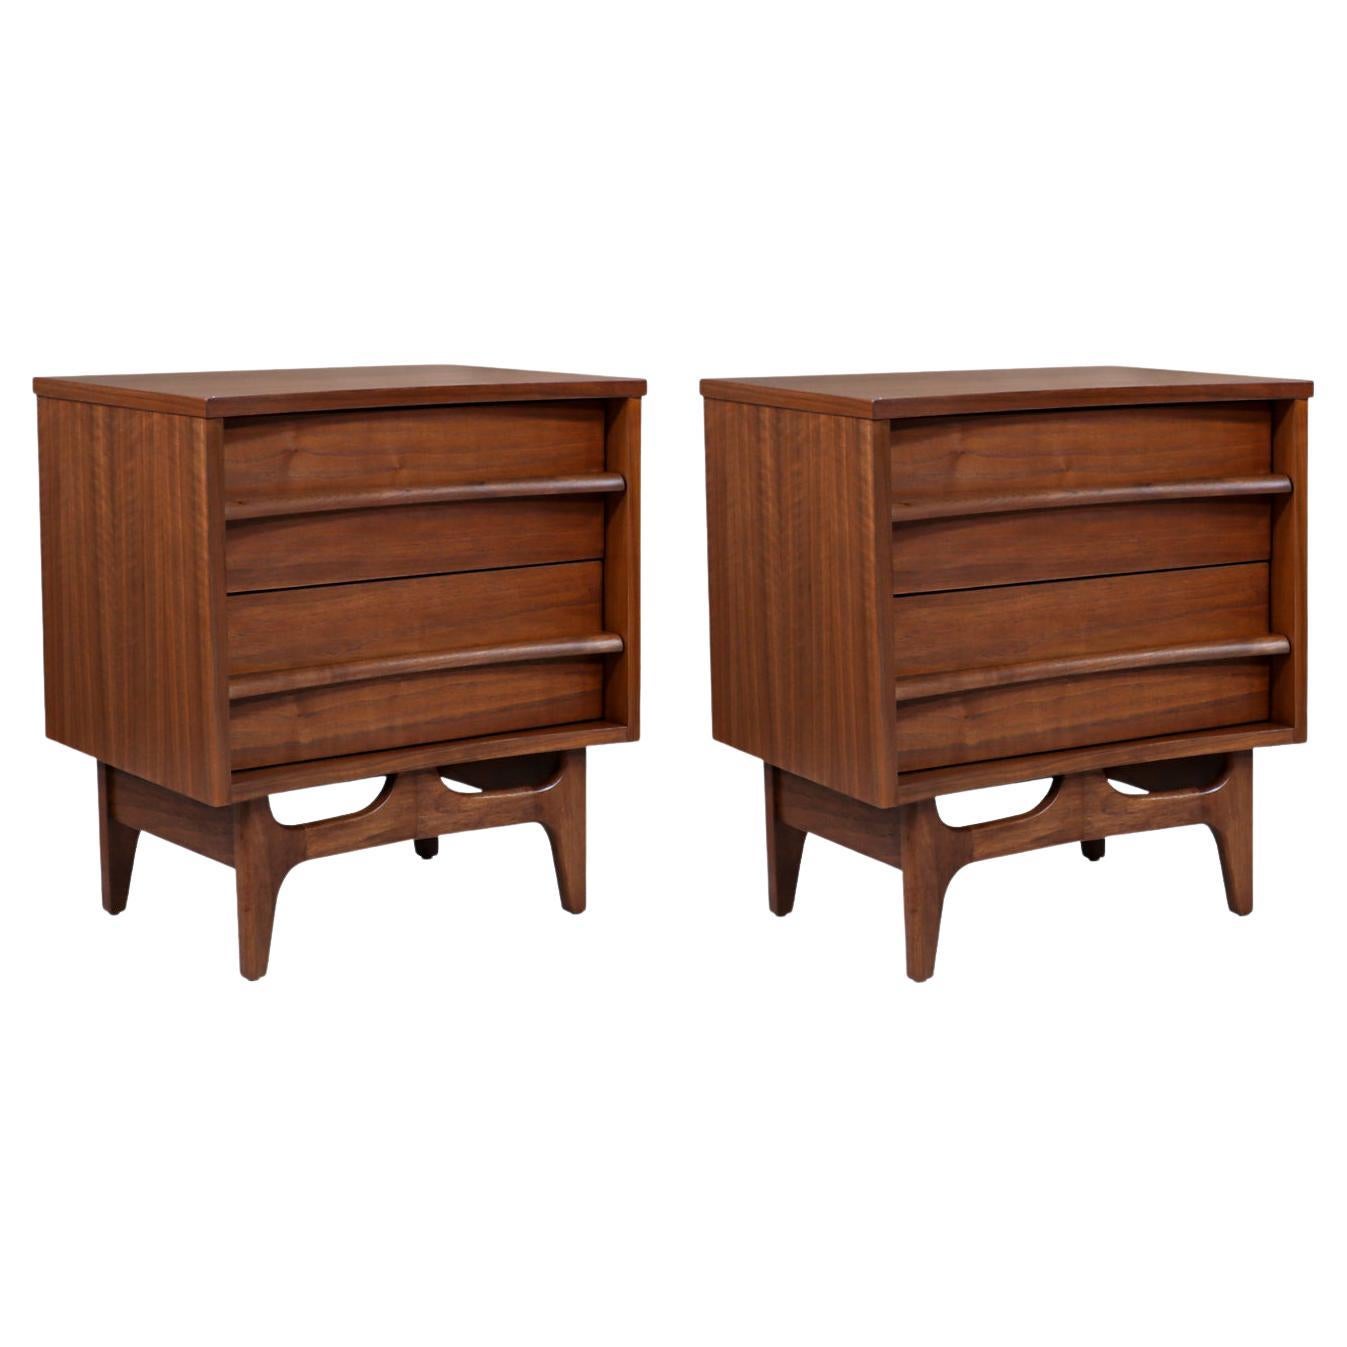 Mid-Century Modern Curved-Front Night Stands by Young Furniture Co. 